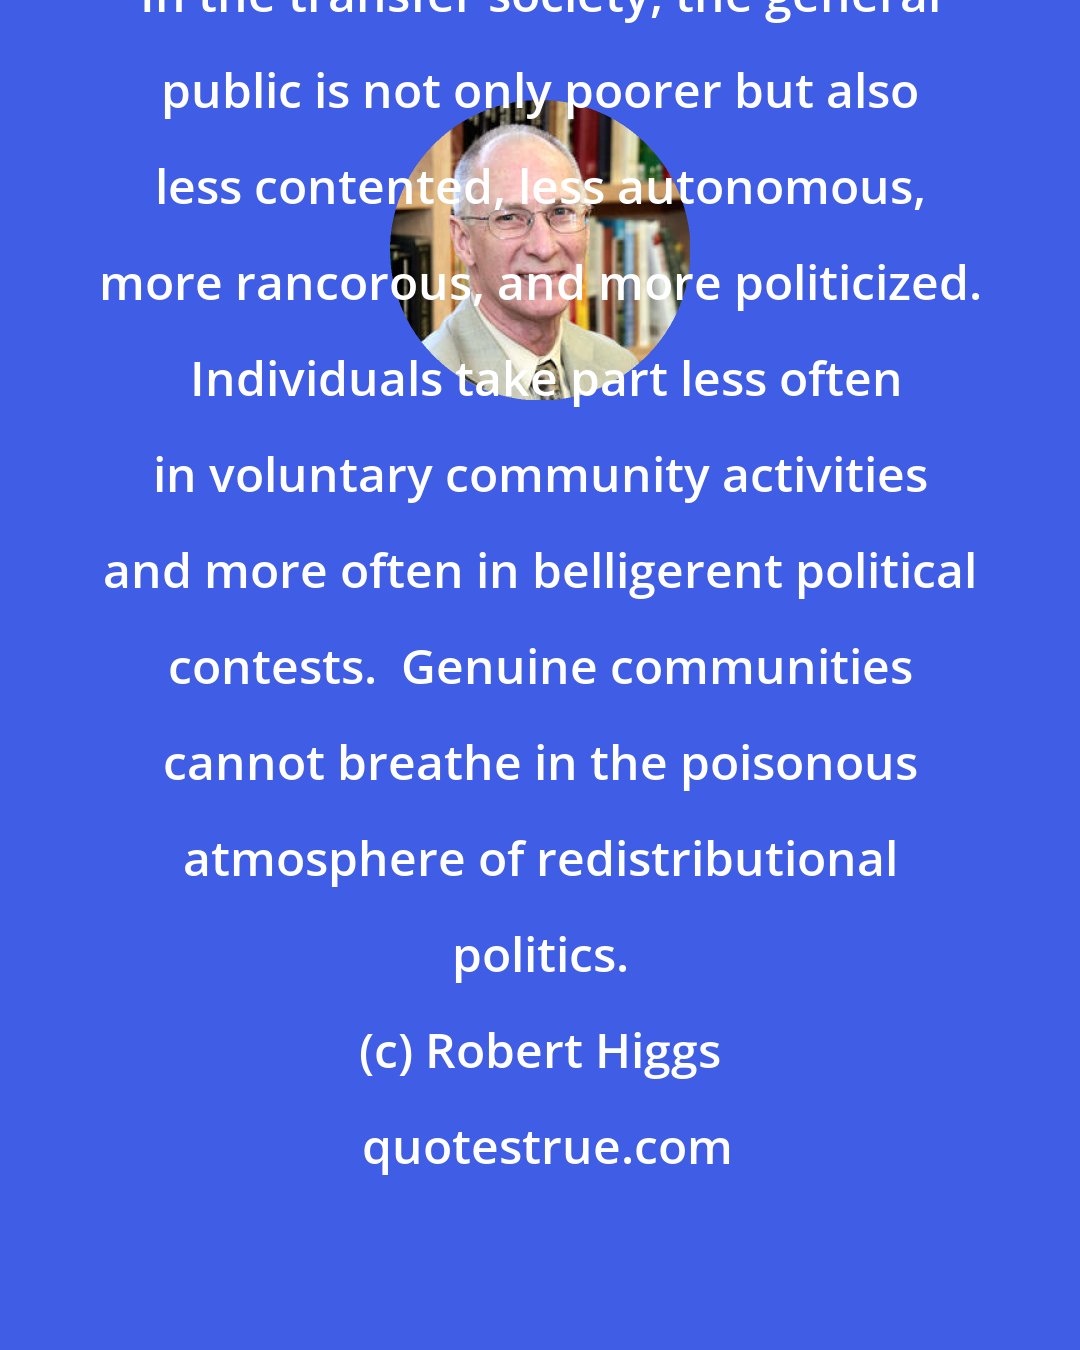 Robert Higgs: In the transfer society, the general public is not only poorer but also less contented, less autonomous, more rancorous, and more politicized.  Individuals take part less often in voluntary community activities and more often in belligerent political contests.  Genuine communities cannot breathe in the poisonous atmosphere of redistributional politics.